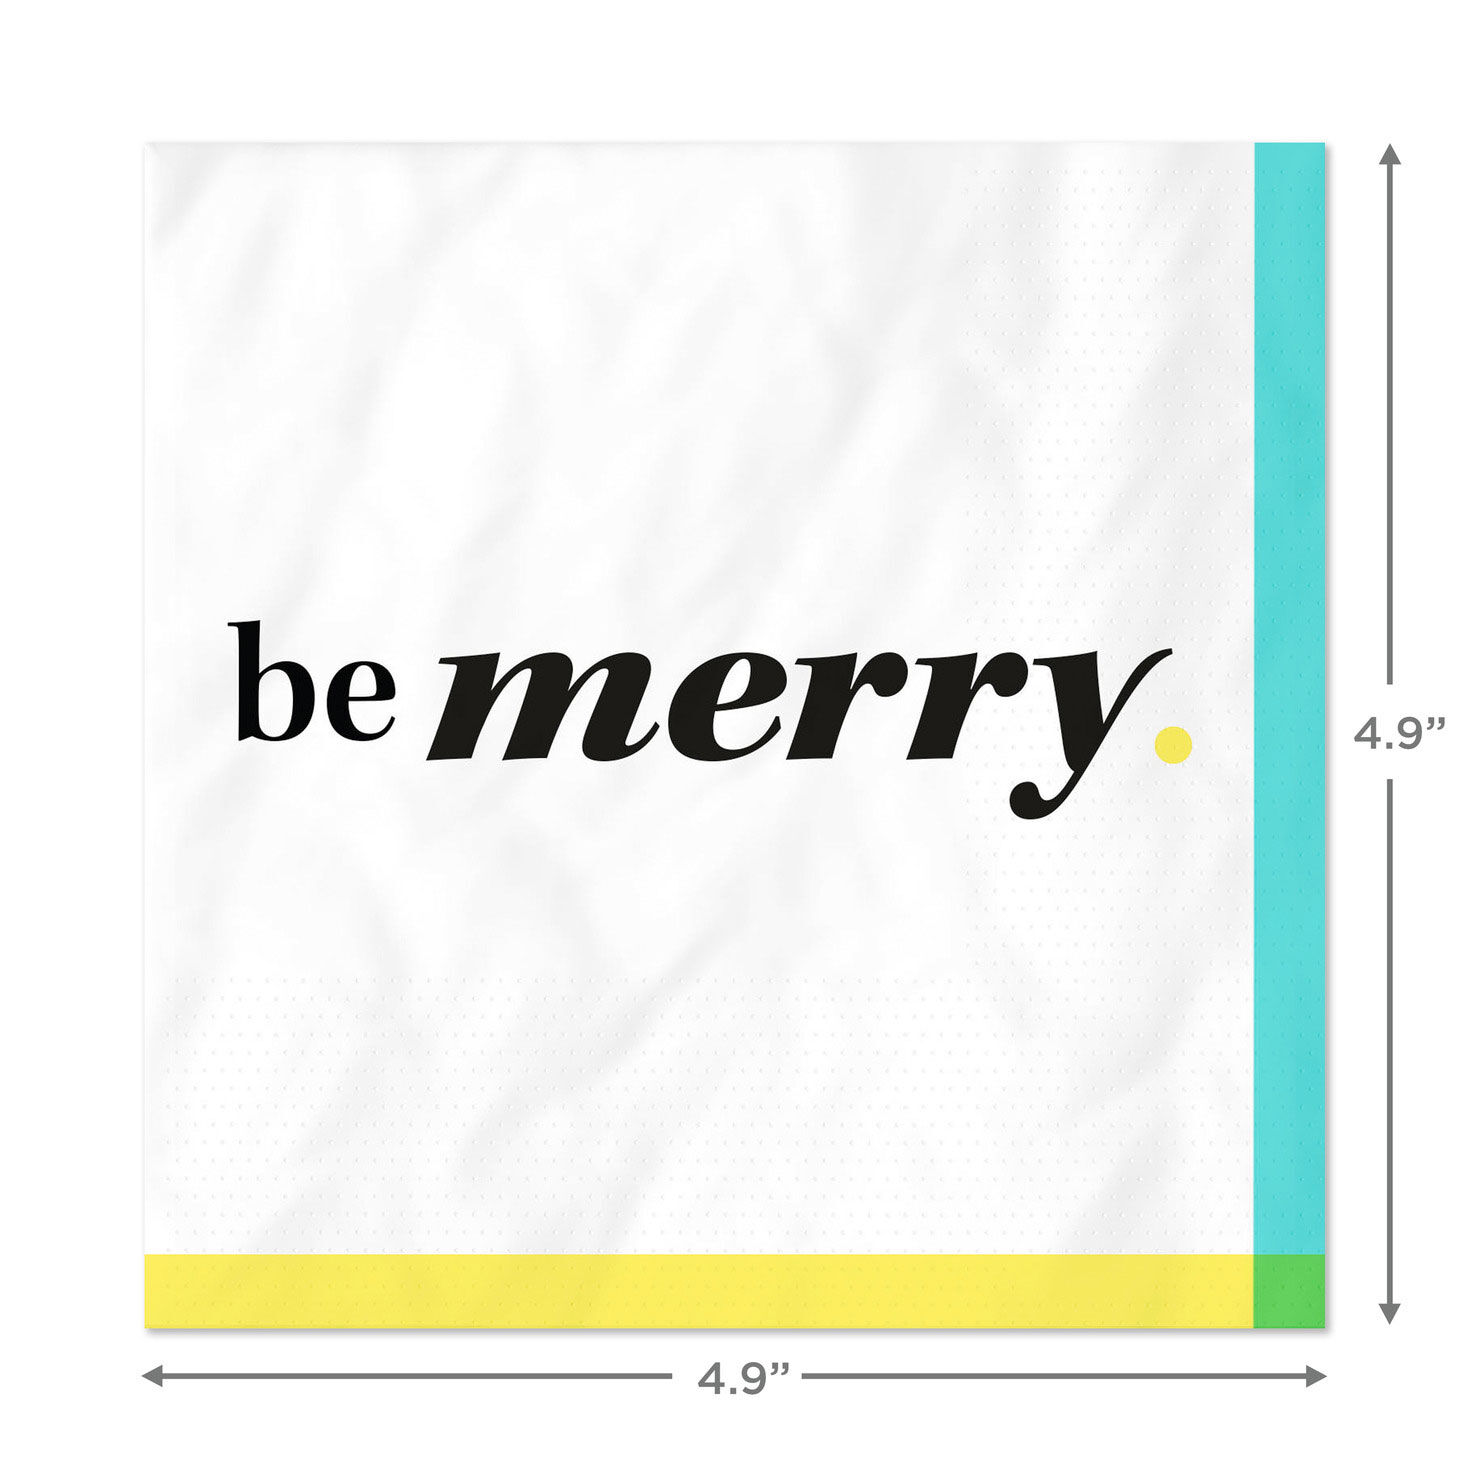 Black and White "Be Merry" Cocktail Napkins, Set of 16 for only USD 4.49 | Hallmark